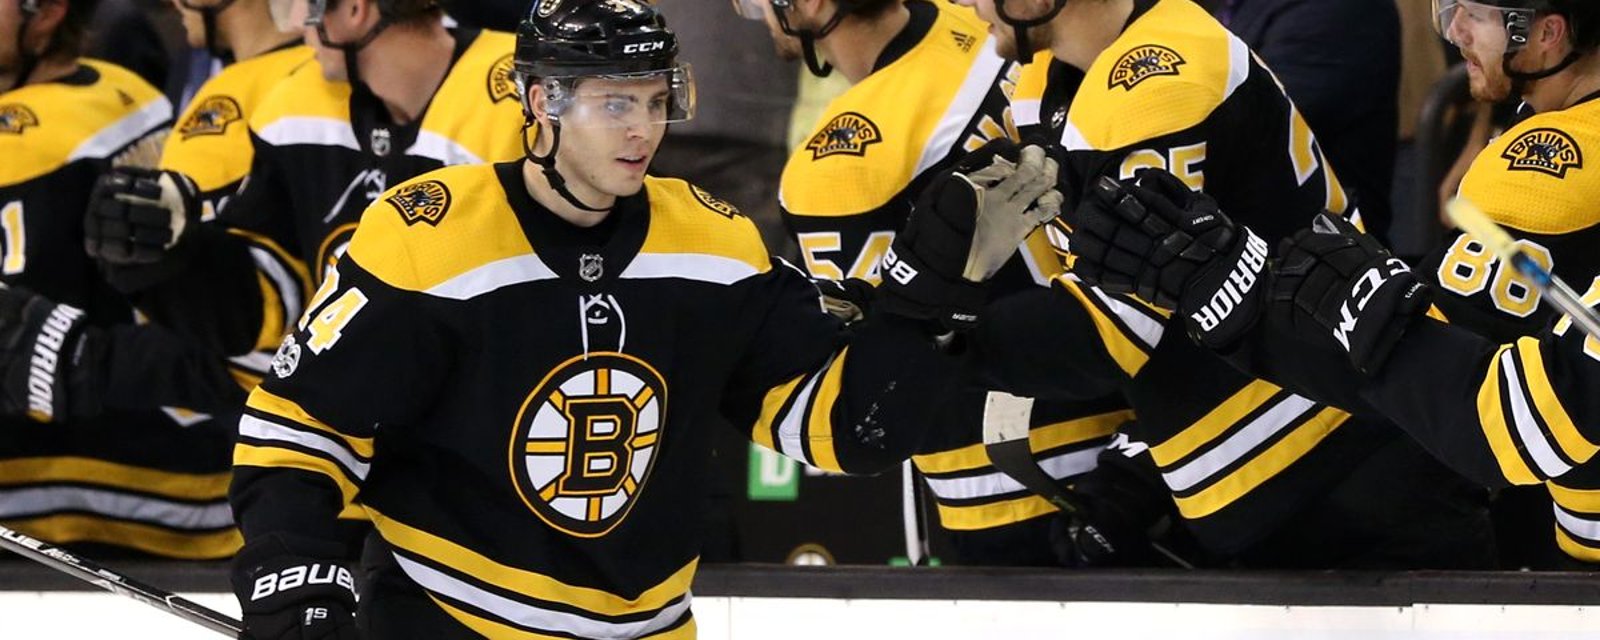 Bruins star forward manages the impossible while playing with foul virus!